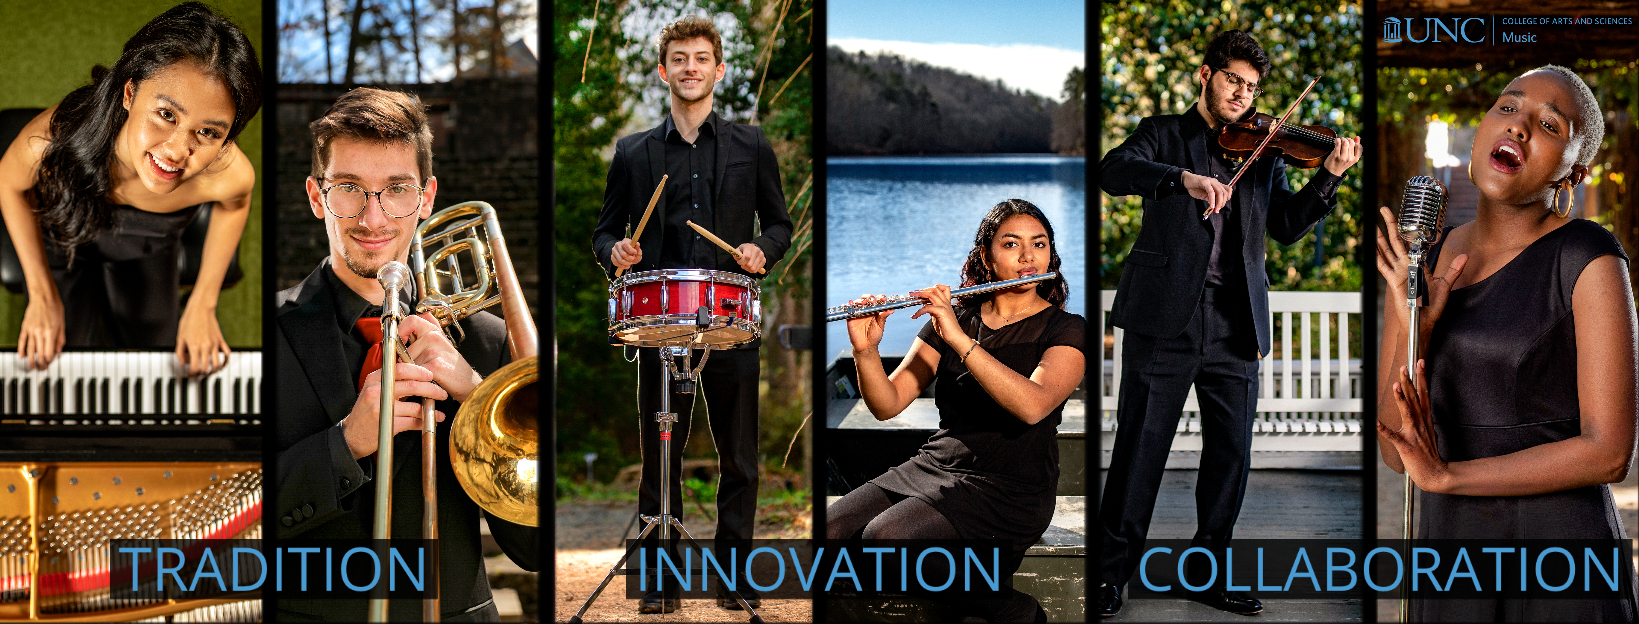 Six music majors with their instruments in nature. Overlaid are the words: Tradition. Innovation. Collaboration.